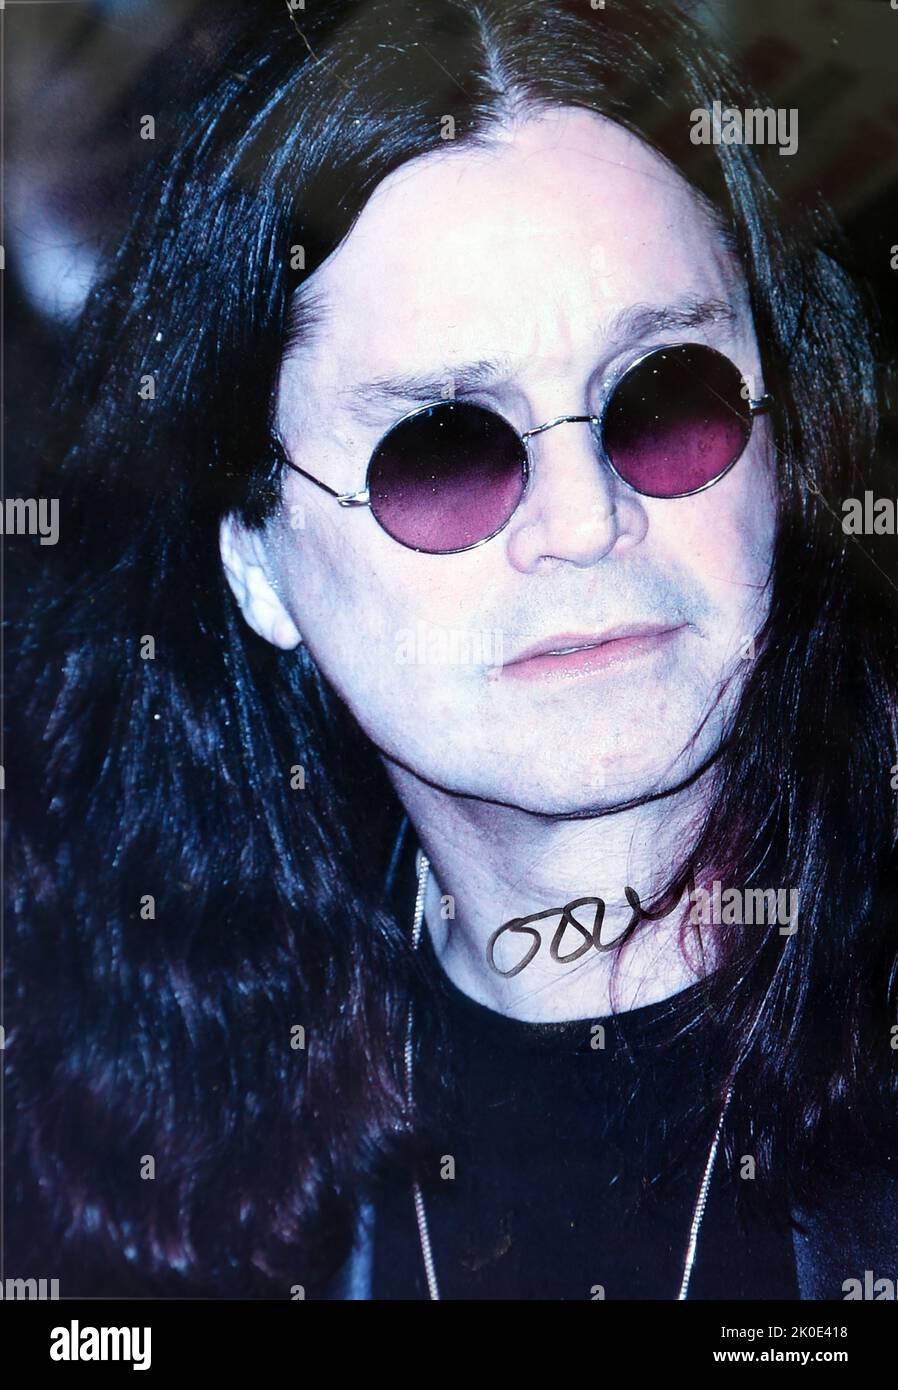 John Michael 'Ozzy' Osbourne (born 1948) is an English singer, songwriter, and television personality. He rose to prominence during the 1970s as the lead vocalist of the heavy metal band Black Sabbath, during which period he adopted the nickname 'Prince of Darkness'. Stock Photo